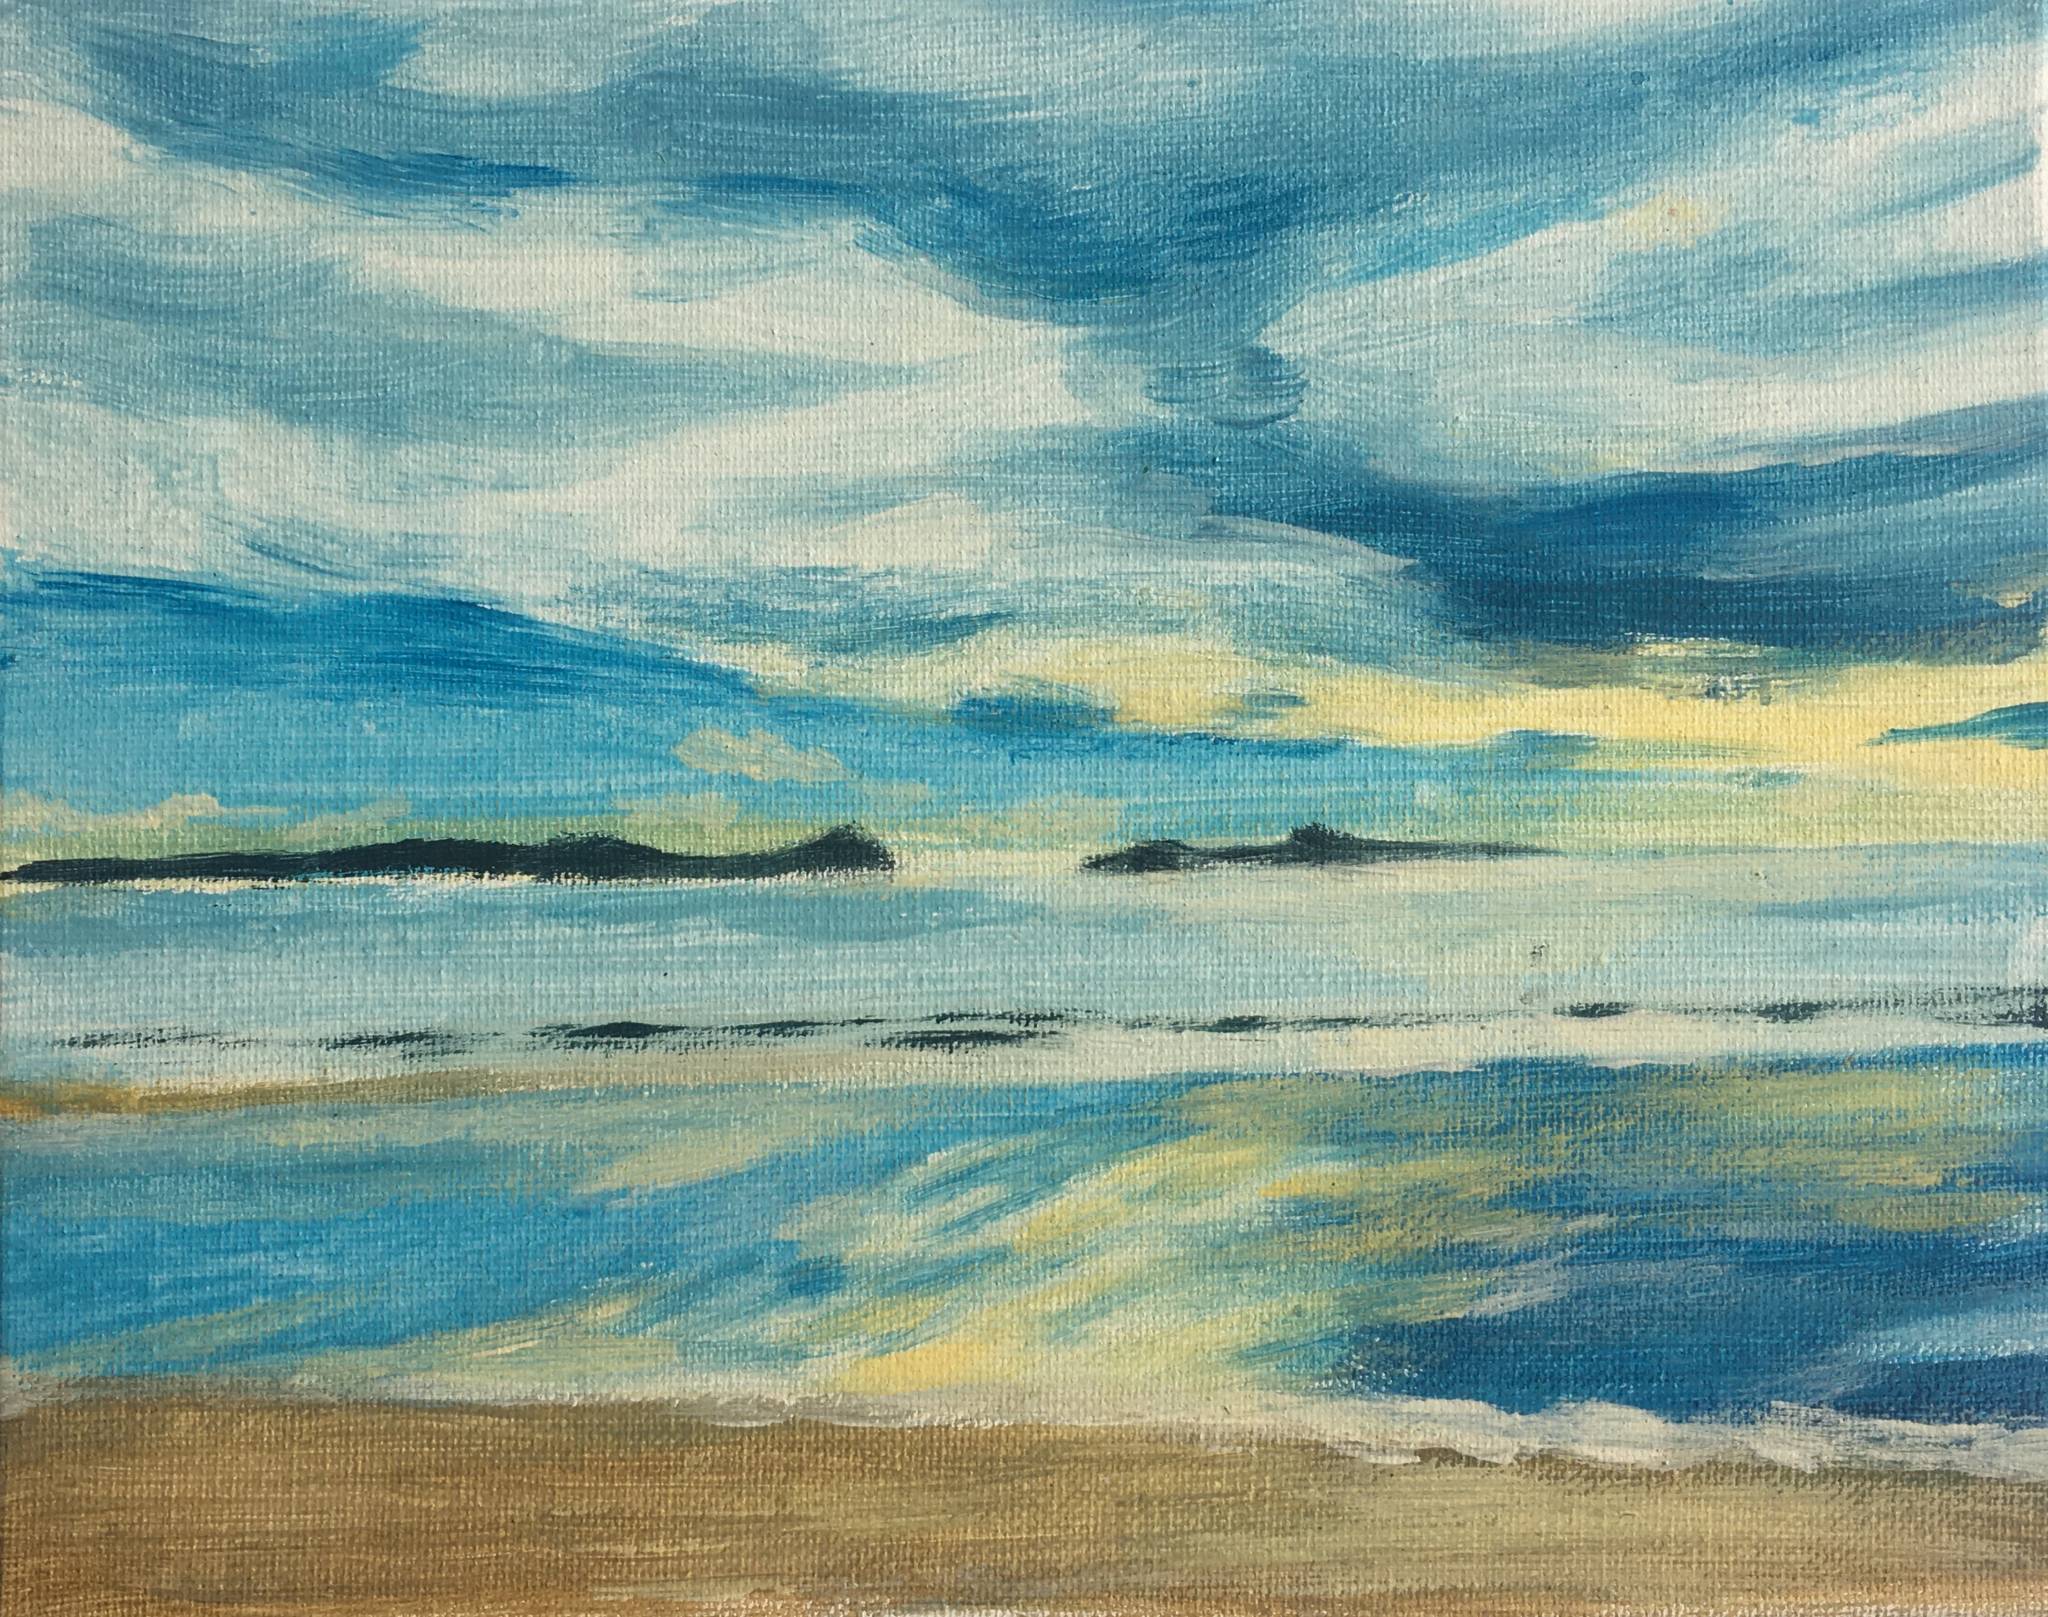 A beach landscape painting, looking out from the beach into the water, there are islands in the distance, and reflections of the clounds in the water, the sky is blue and yellow